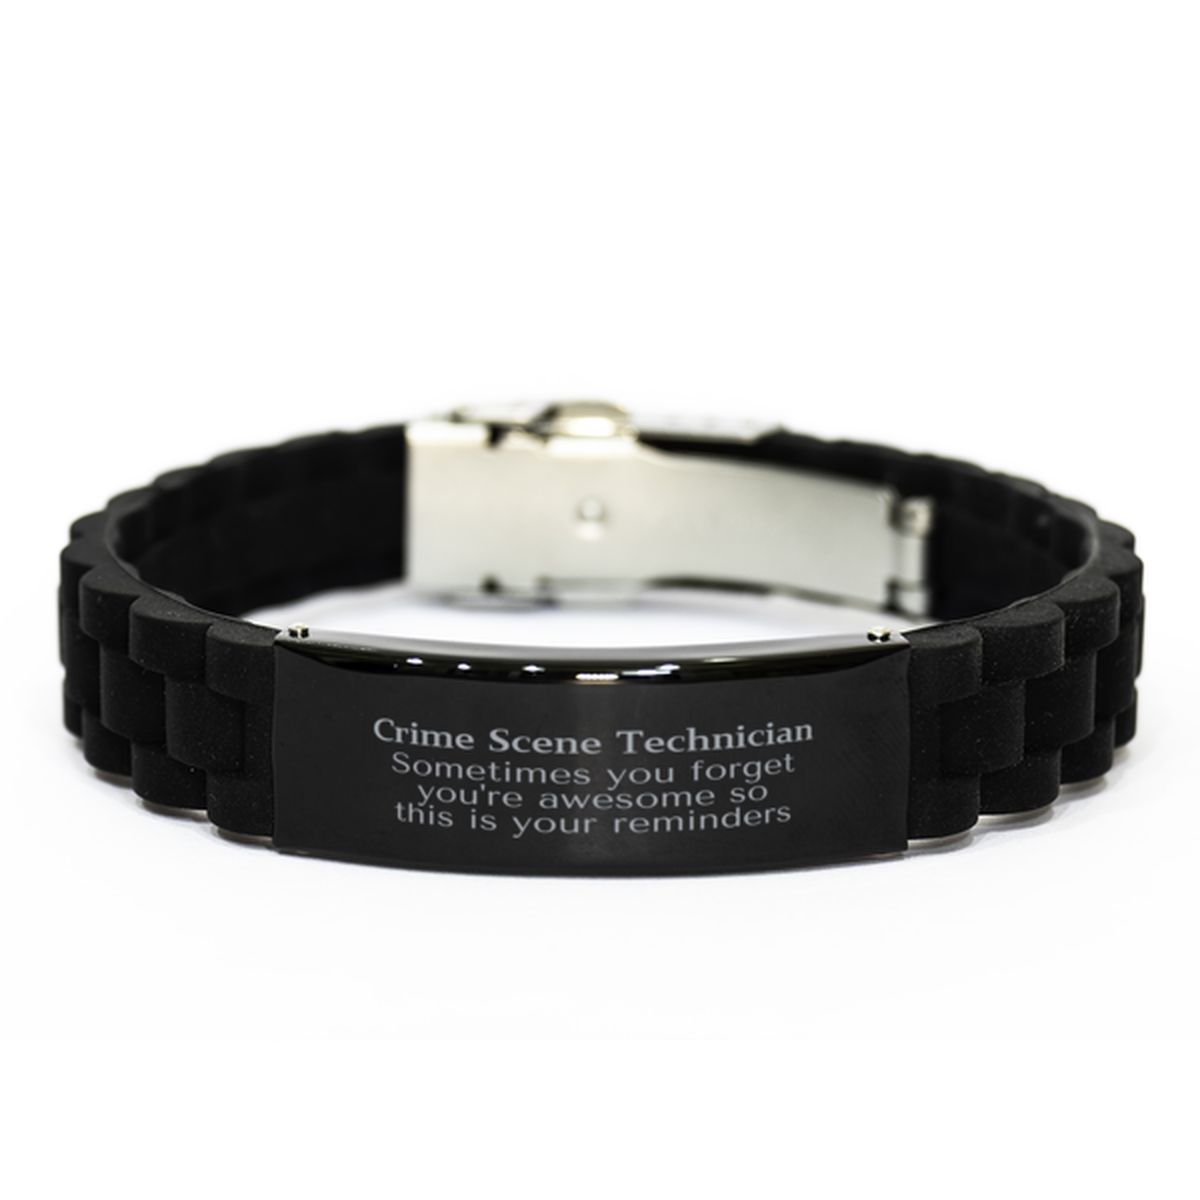 Sentimental Crime Scene Technician Black Glidelock Clasp Bracelet, Crime Scene Technician Sometimes you forget you're awesome so this is your reminders, Graduation Christmas Birthday Gifts for Crime Scene Technician, Men, Women, Coworkers